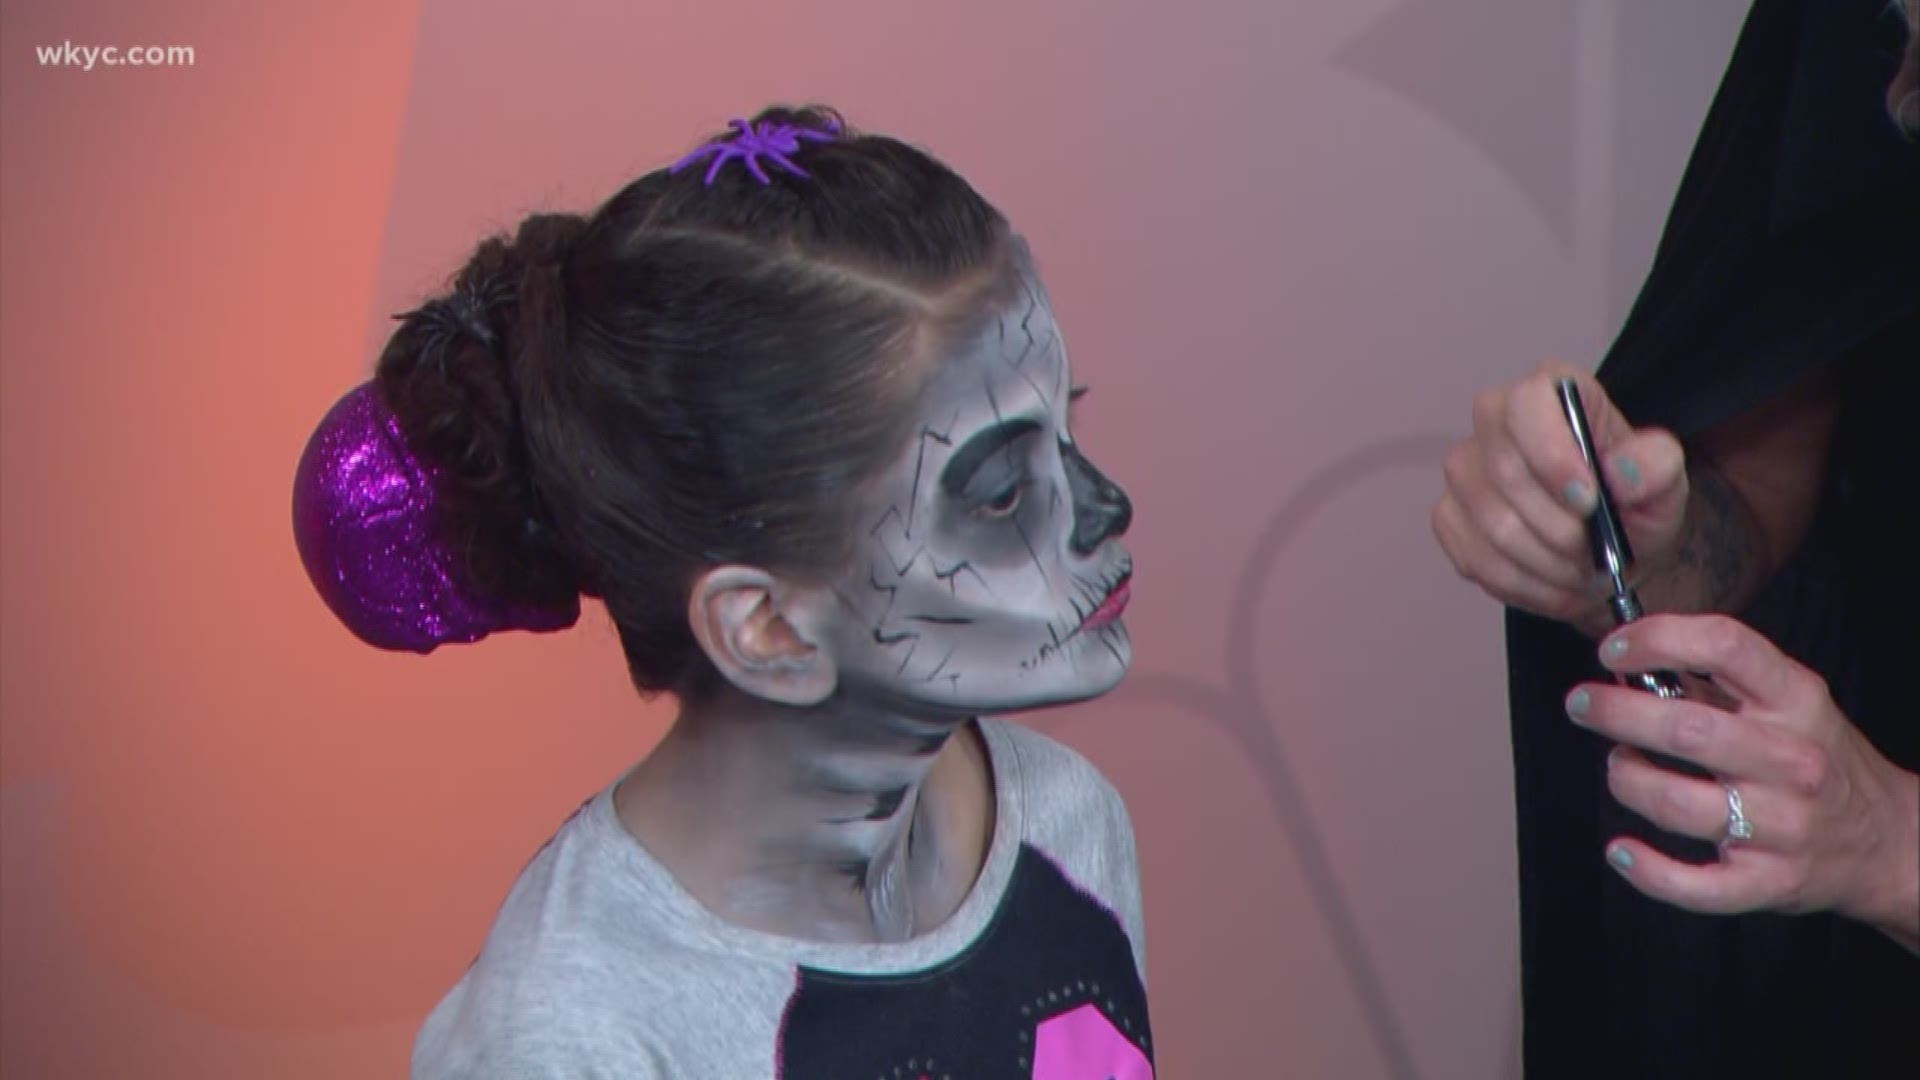 Halloween Week wraps up on Donovan Live with hair and makeup tips